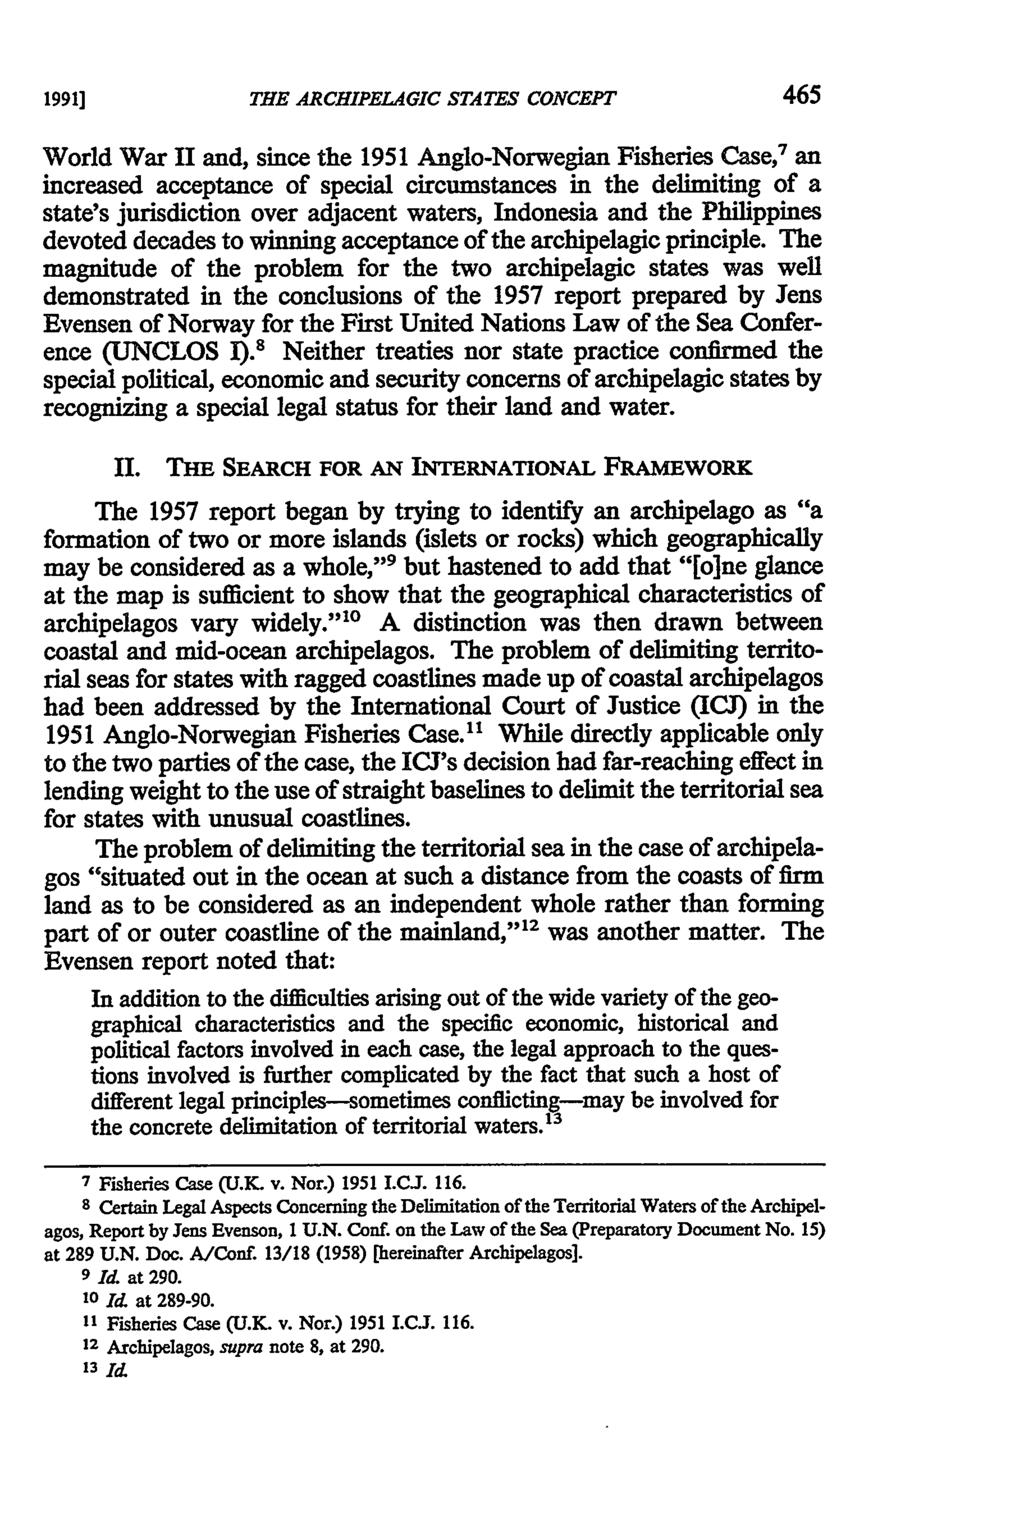 THE ARCHIPELAGIC STATES CONCEPT World War II and, since the 1951 Anglo-Norwegian Fisheries Case, 7 an increased acceptance of special circumstances in the delimiting of a state's jurisdiction over